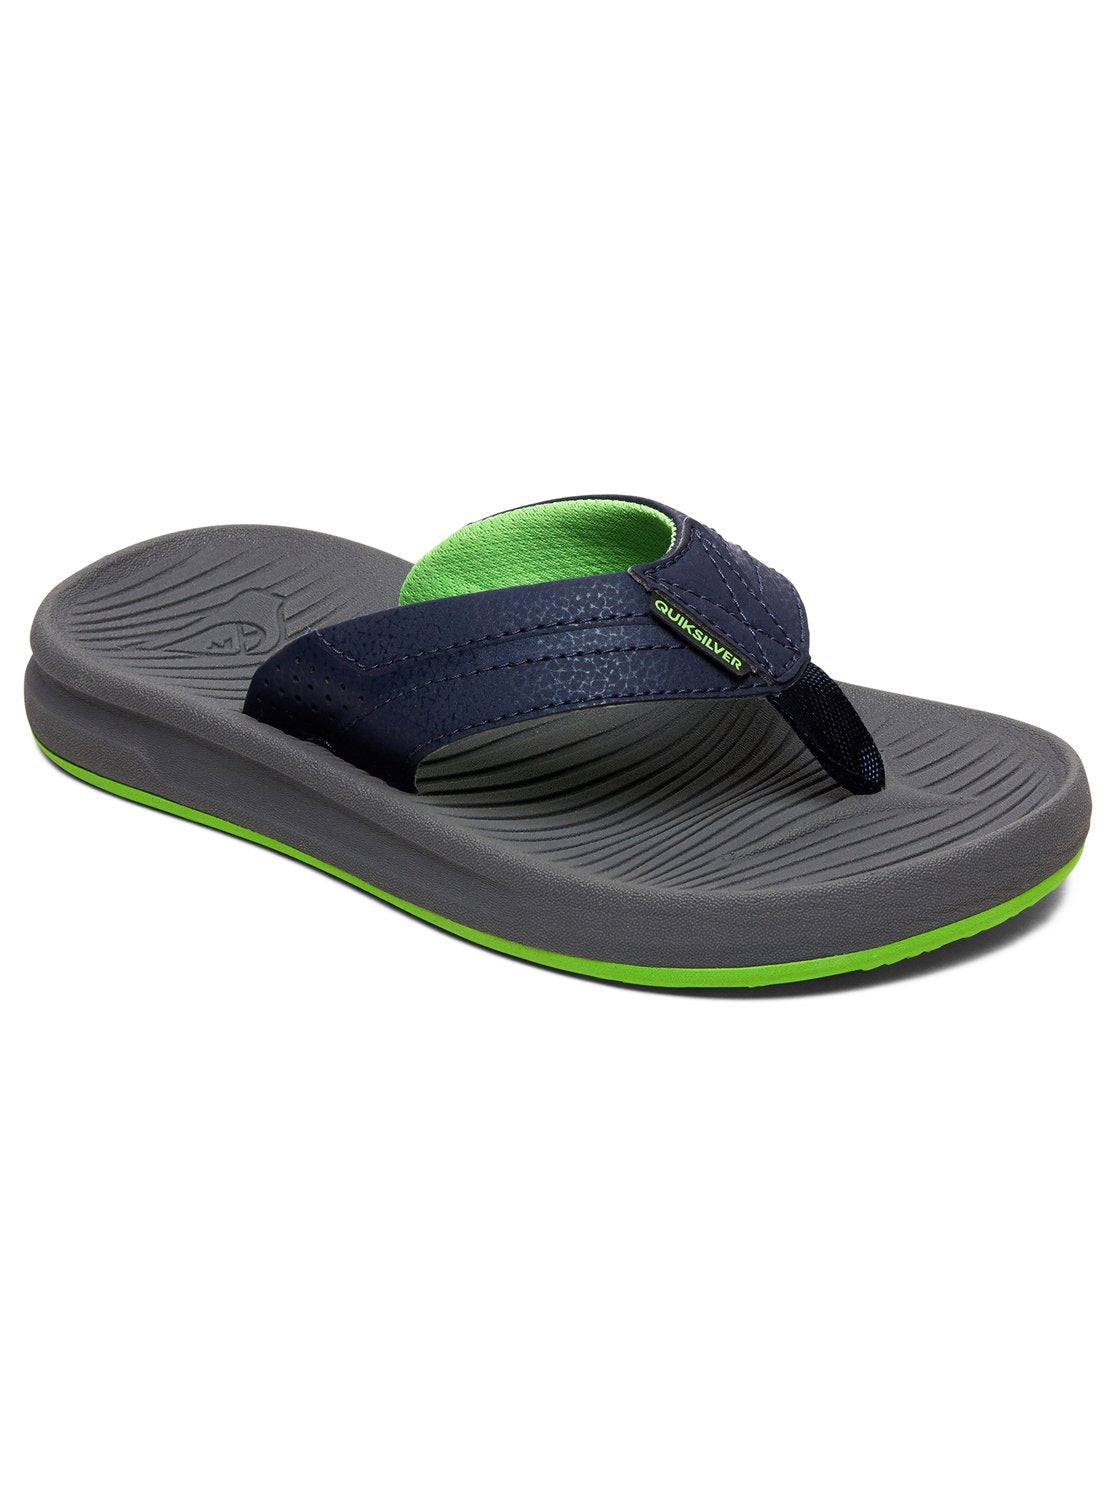 Quiksilver Oasis Youth Sandals XBSB-Blue-Grey-Blue 13 C